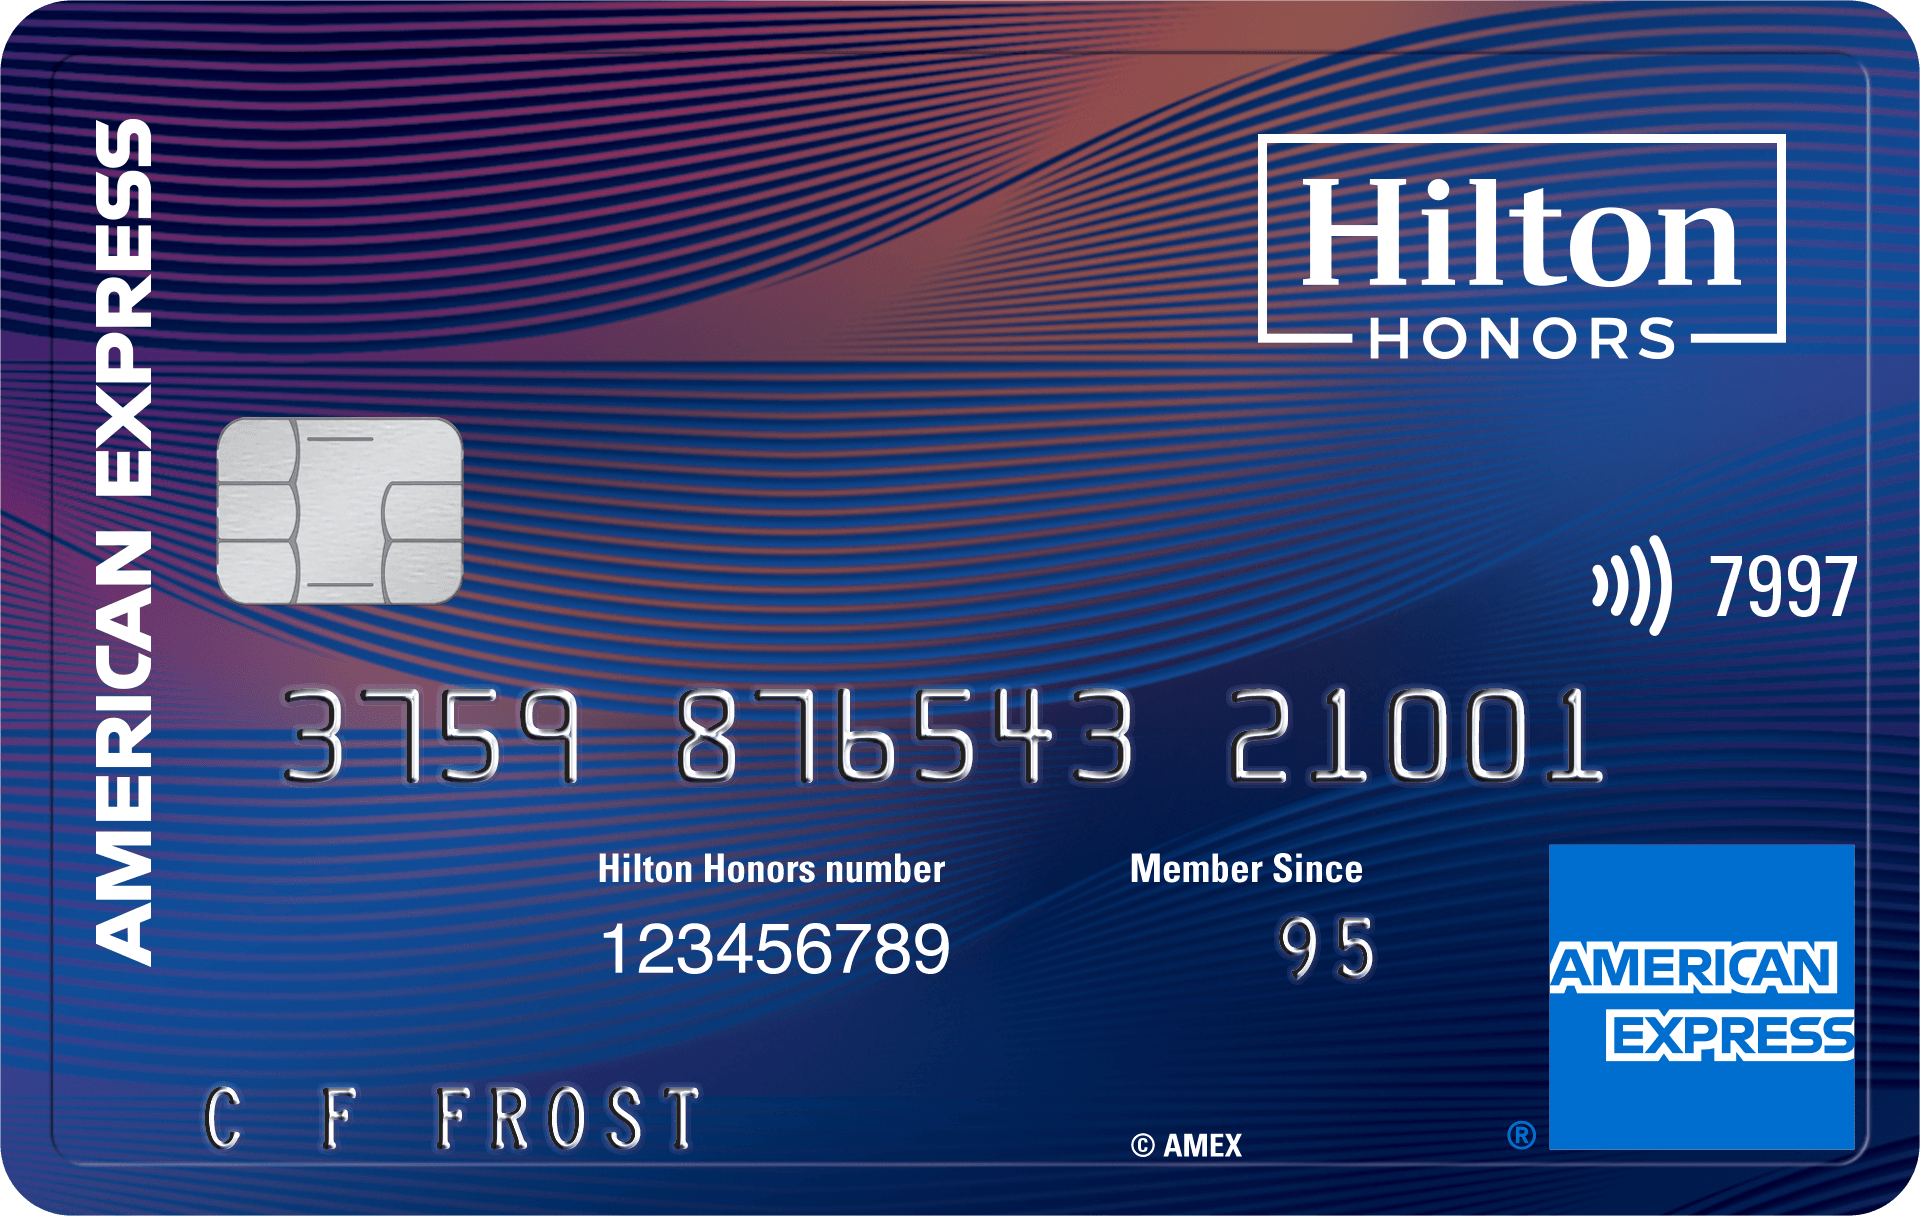 Hilton Honors Aspire card, chip enabled, features contactless tap to pay